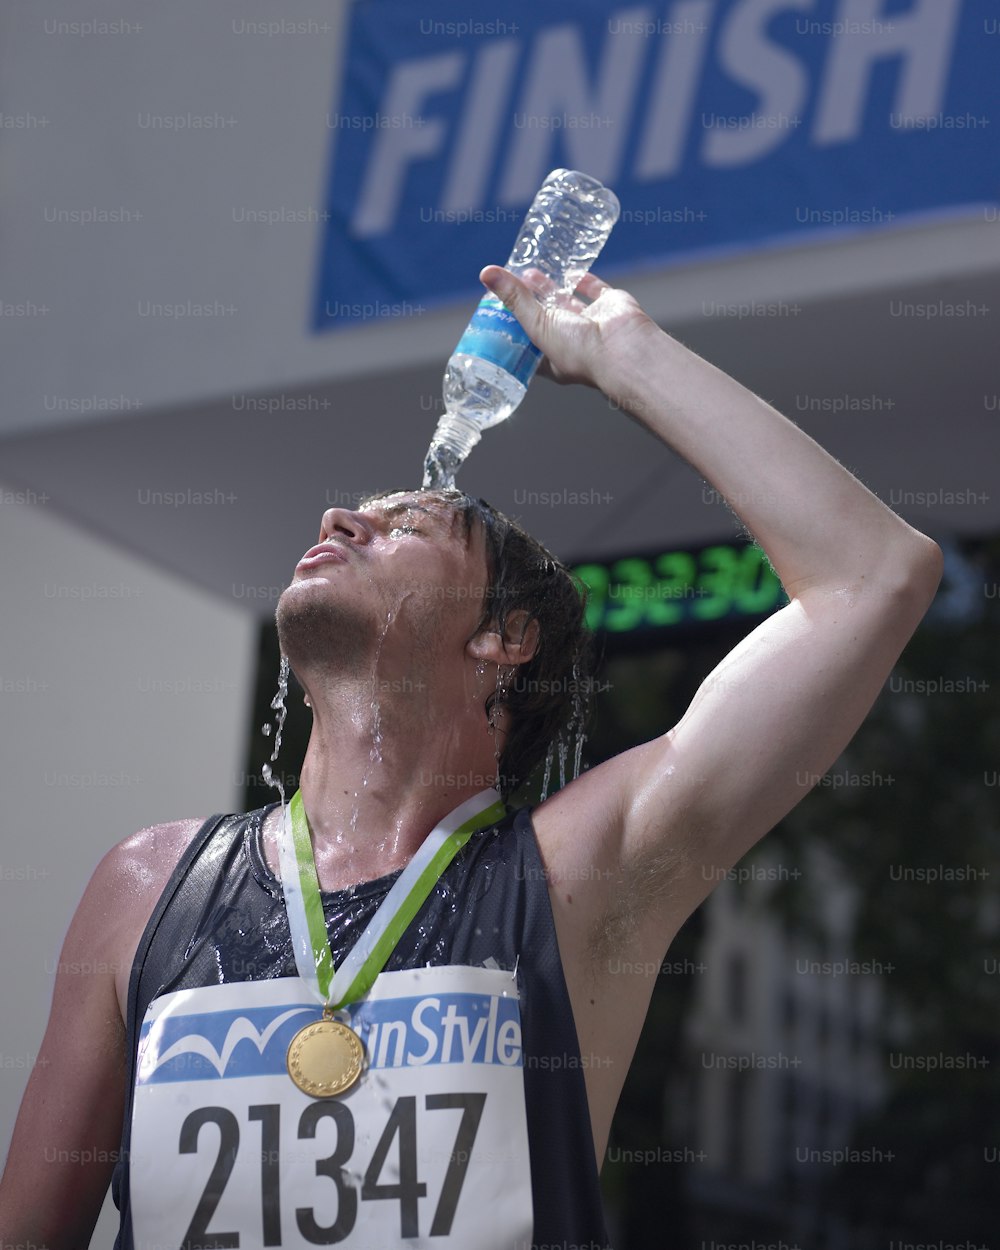 a man drinking water from a water bottle